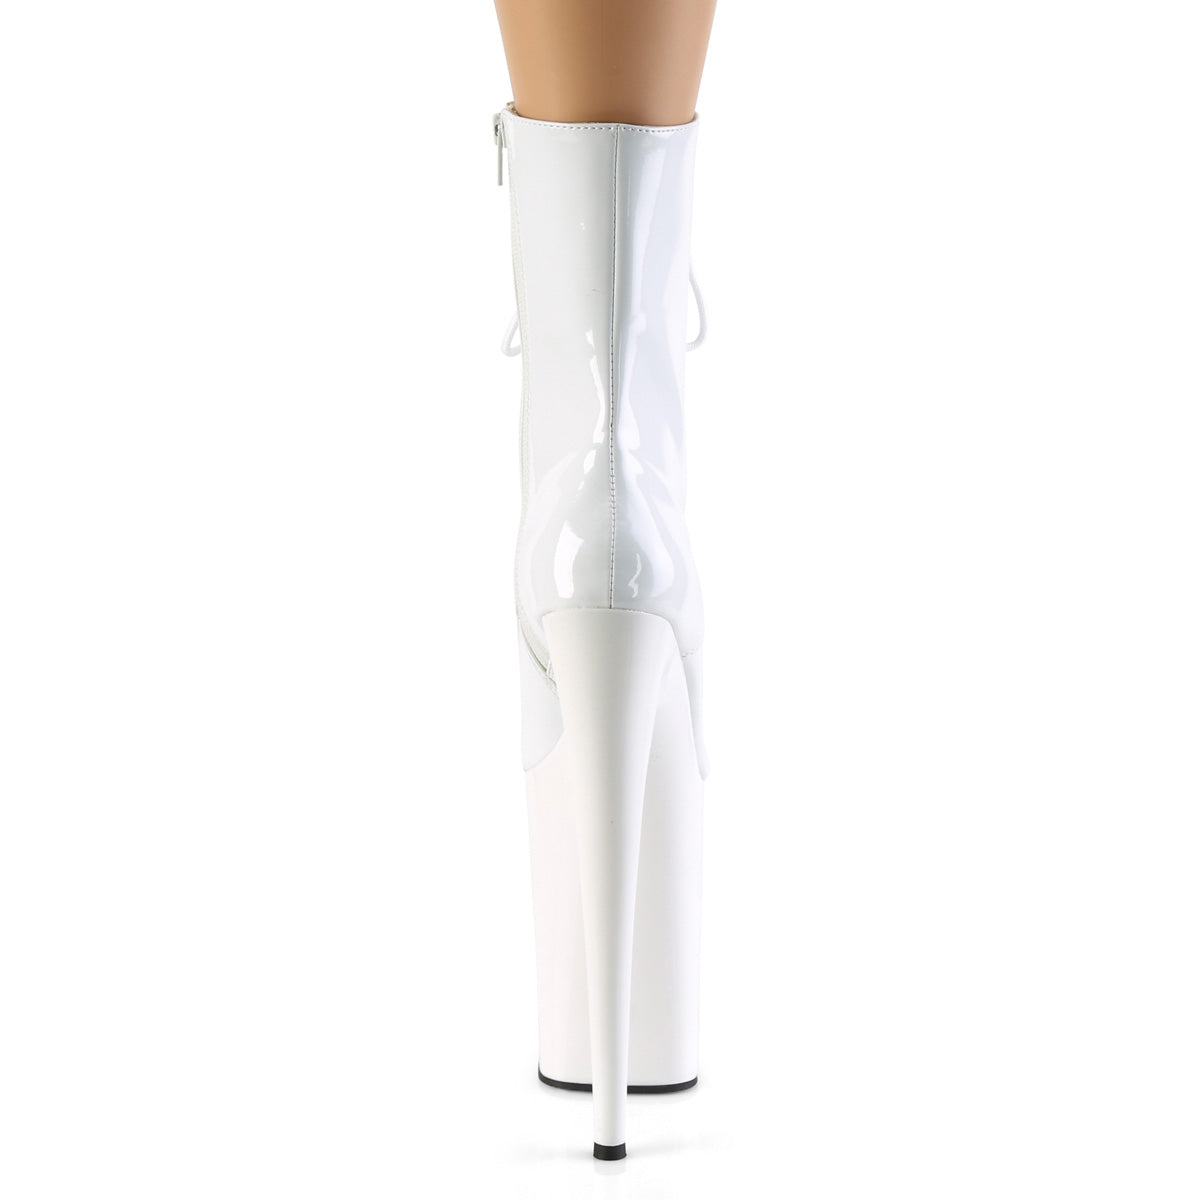 INFINITY-1020 Pleaser White Patent/White Platform Shoes [Ankle Boots]